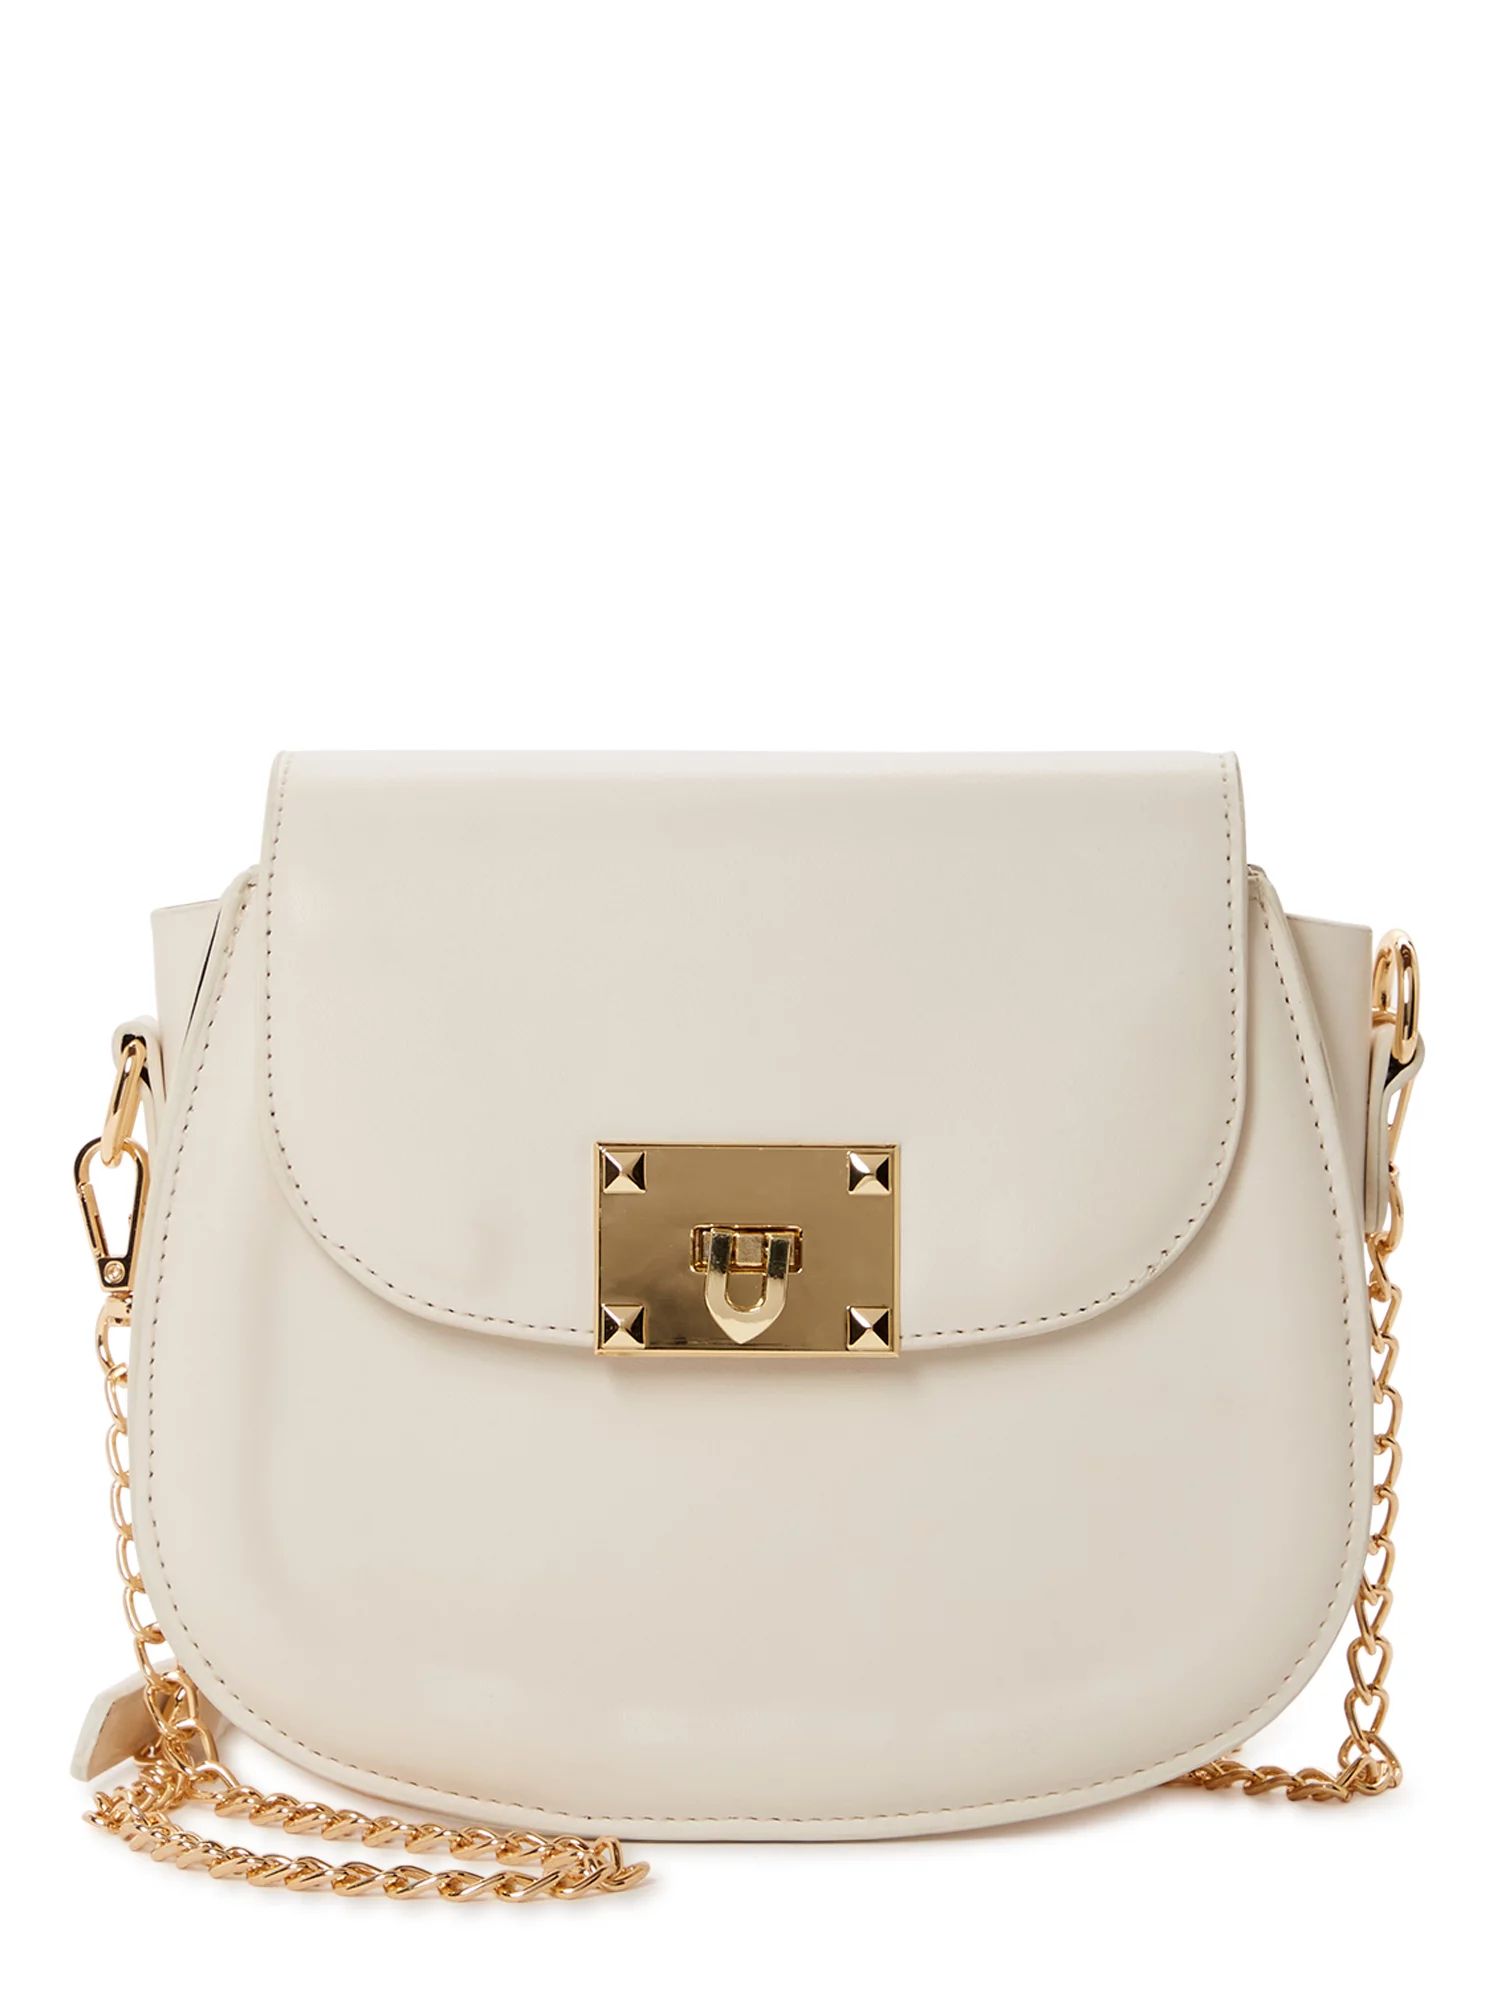 Jane & Berry Women's Adult Faux Leather Saddle Bag with Gold Chain Strap White | Walmart (US)